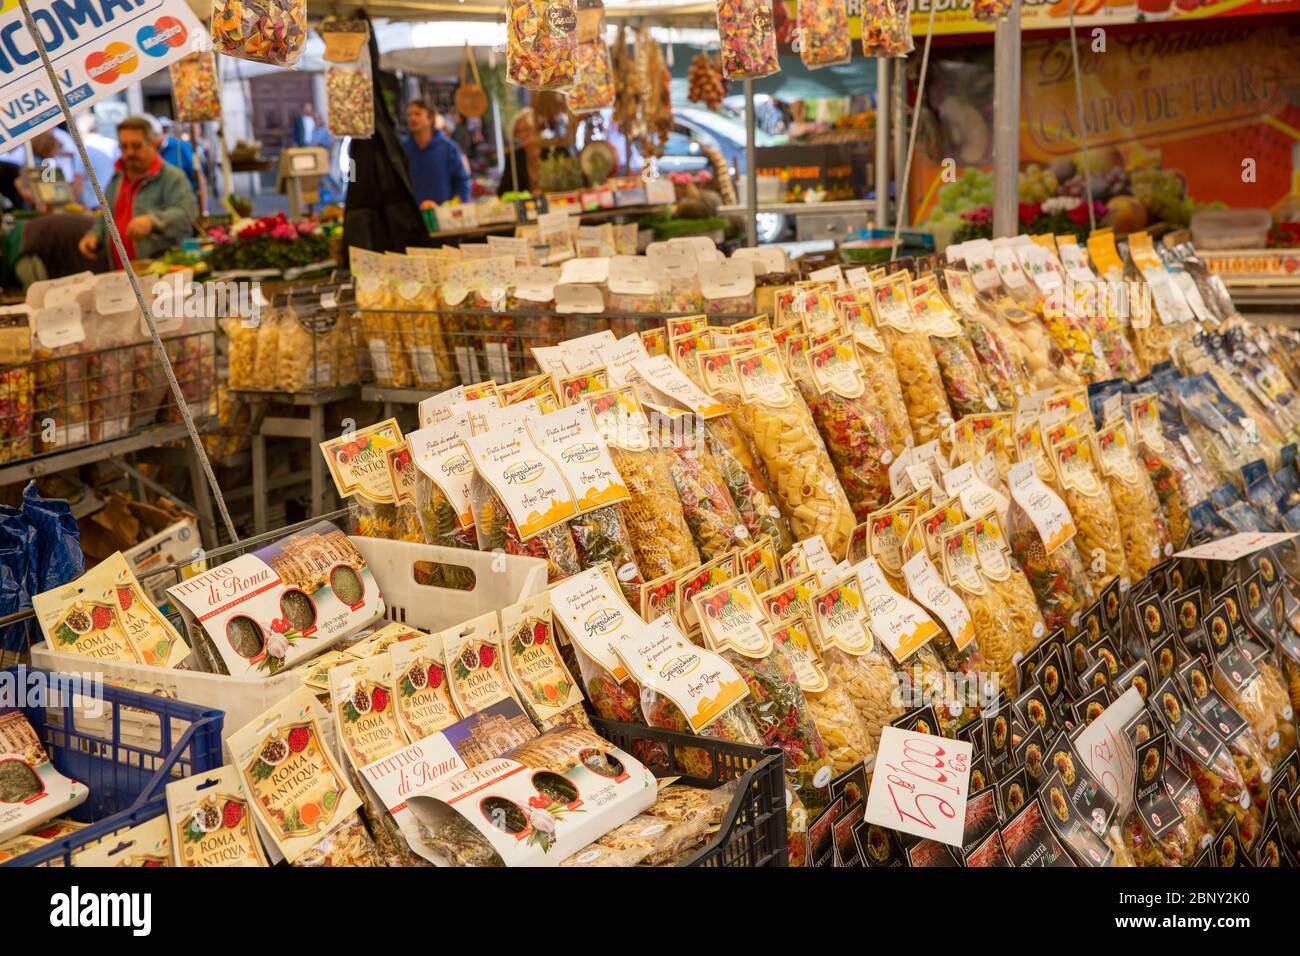 Pasta being sold on a stall at a street market in Rome, Italy Stock Photo